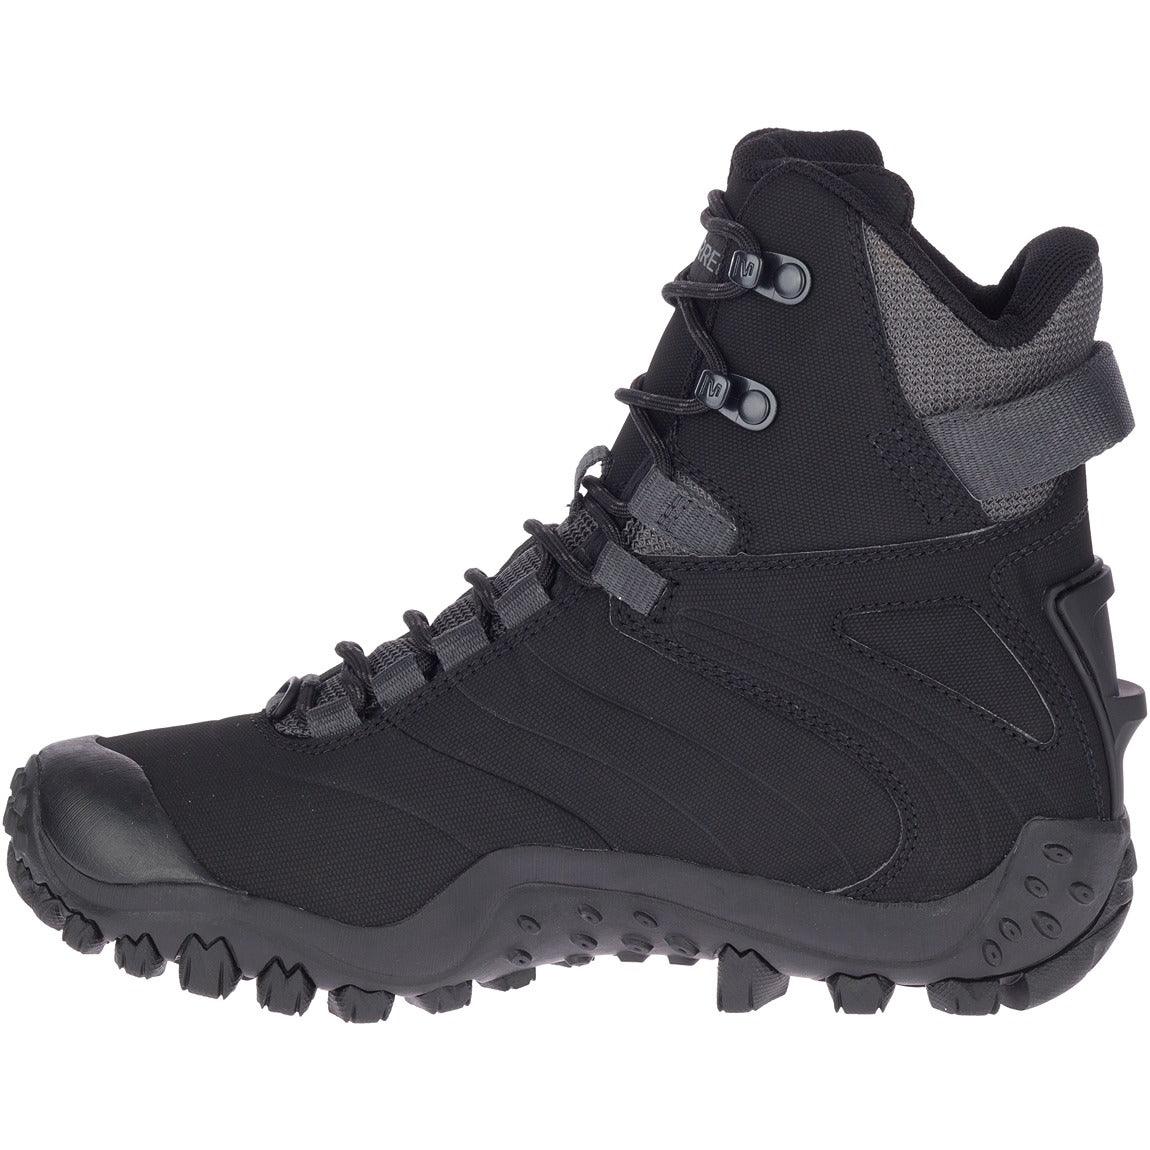 Merrell Chameleon Thermo 8 Tall Waterproof Boot 